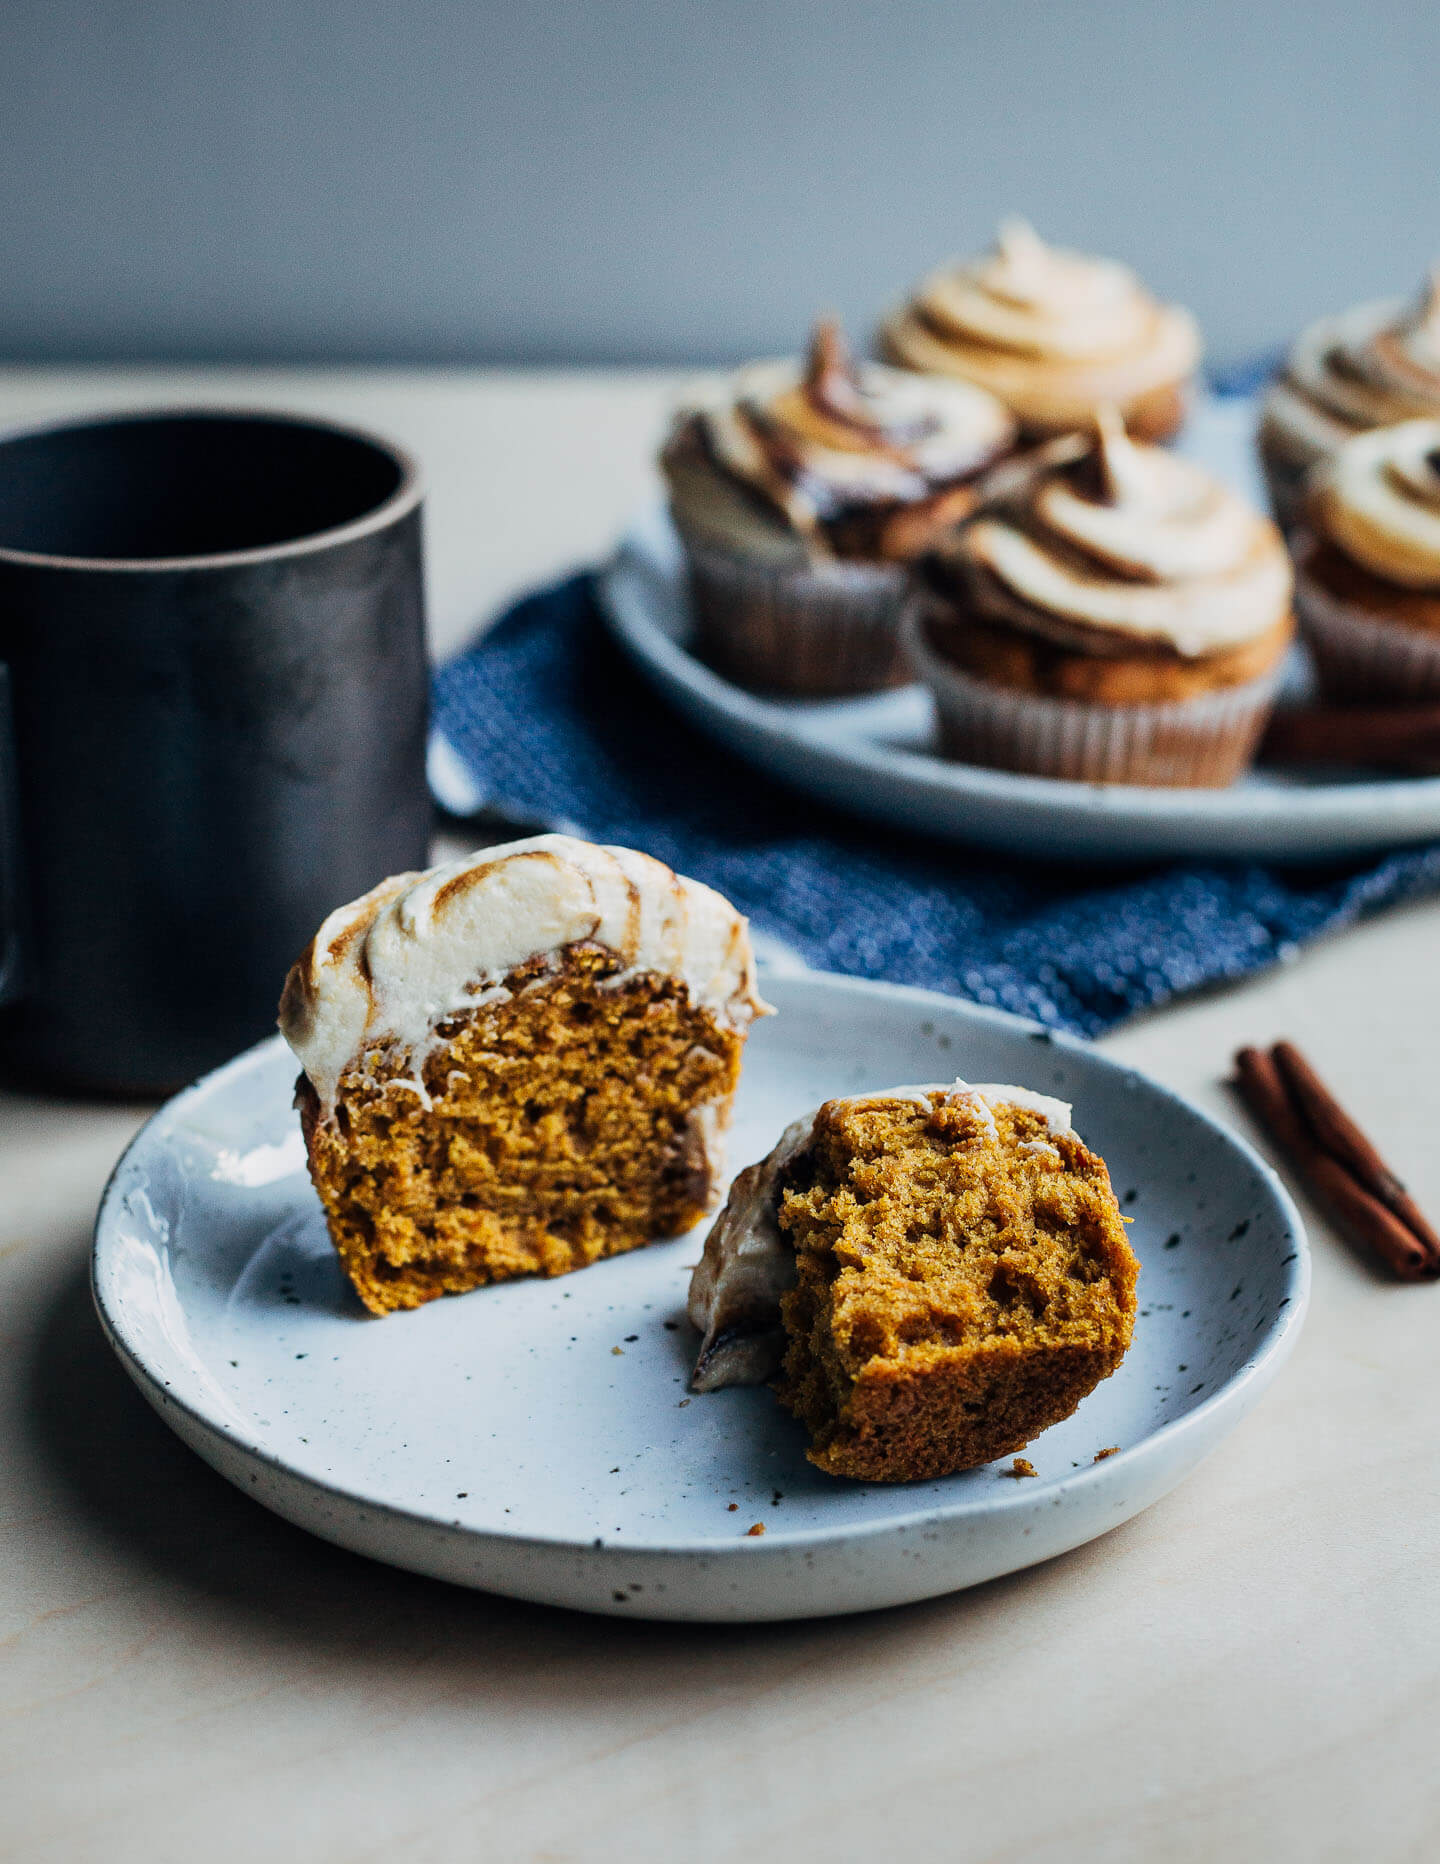 A pumpkin cupcake on a plate, with a mug of tea and a plate of cupcakes in the background. 